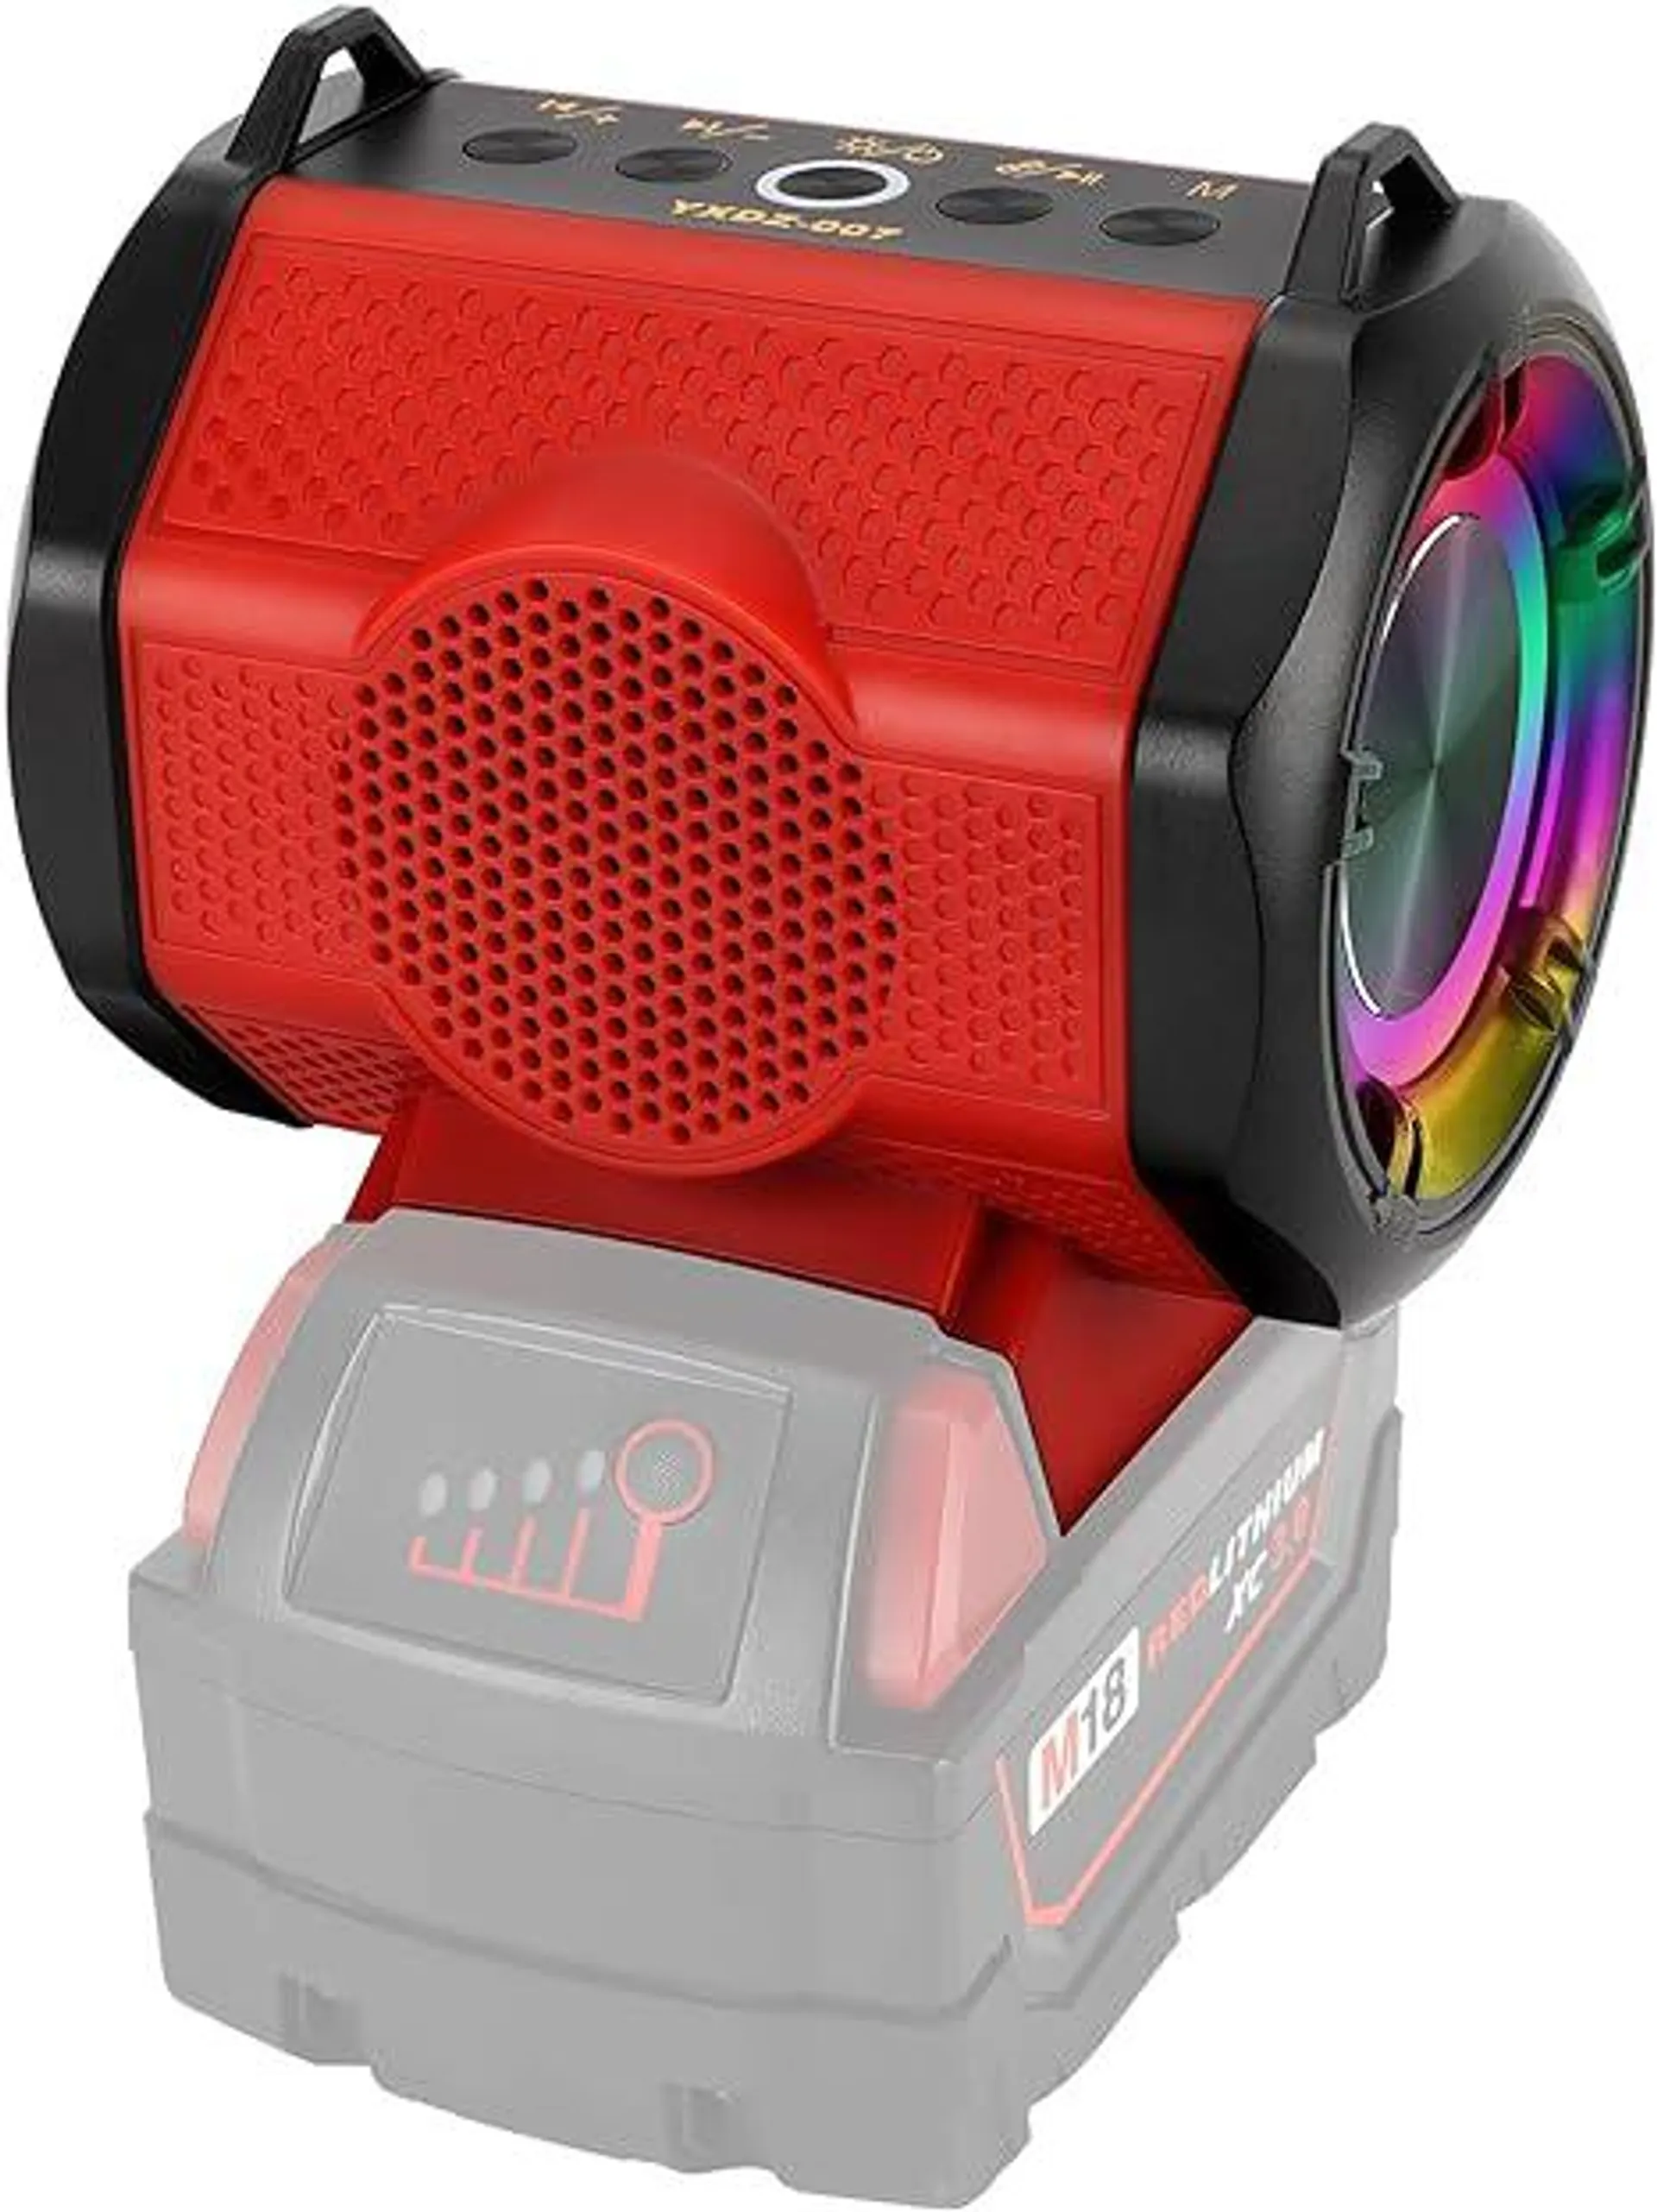 Speaker for Milwaukee M18 18V Lithium-ion Battery, Portable Speaker Wireless with HD Sound, TWS Pairing, BT5.3, Up to 24H Playtime, Jobsite Speakers for Outdoor Travel(Battery Not Included)